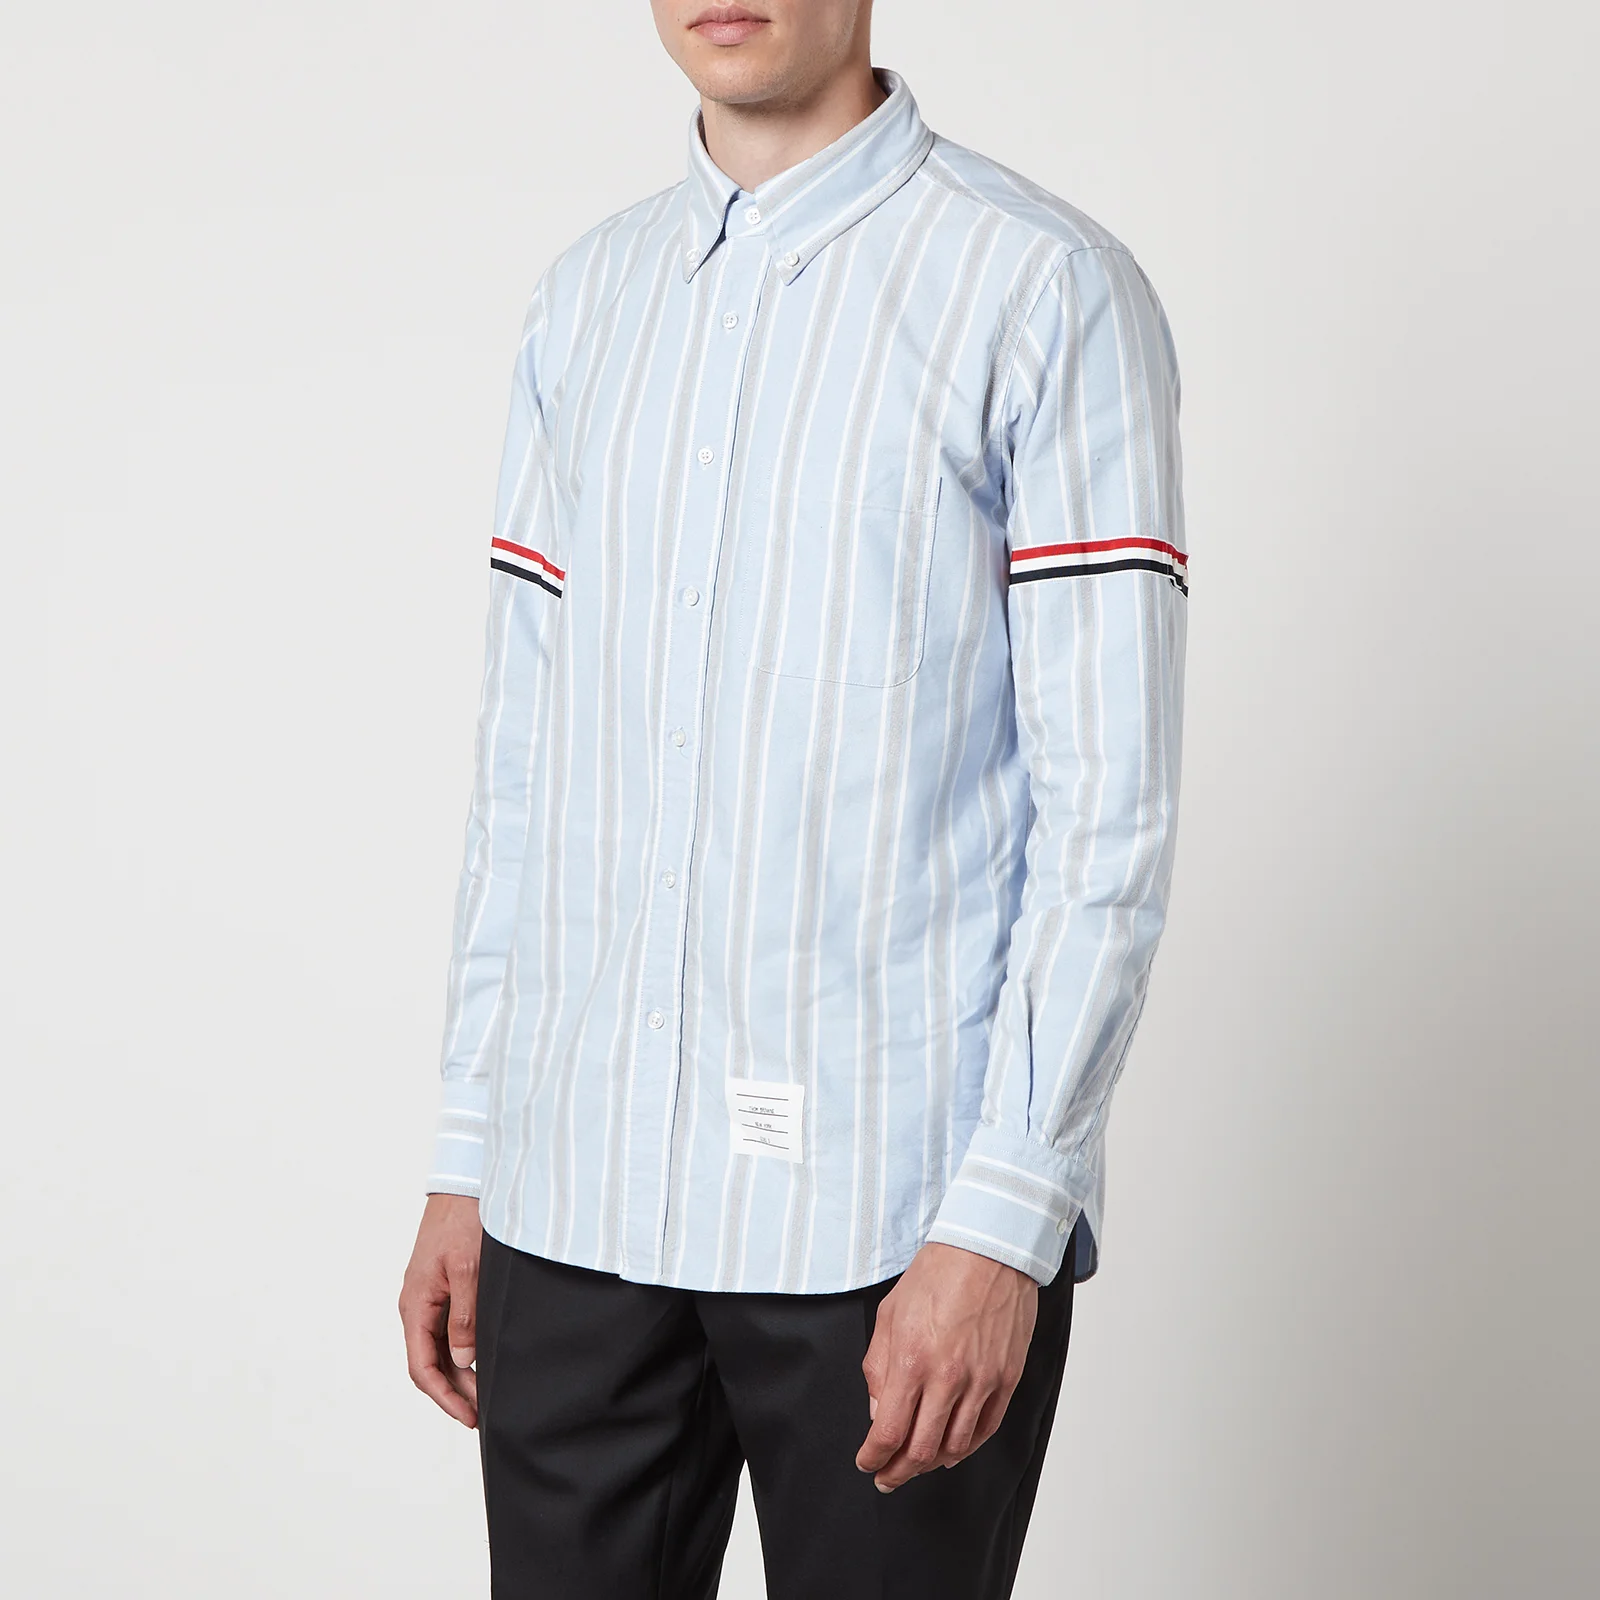 Thom Browne Straight Fit Striped Oxford Striped Shirt - 1/S Image 1